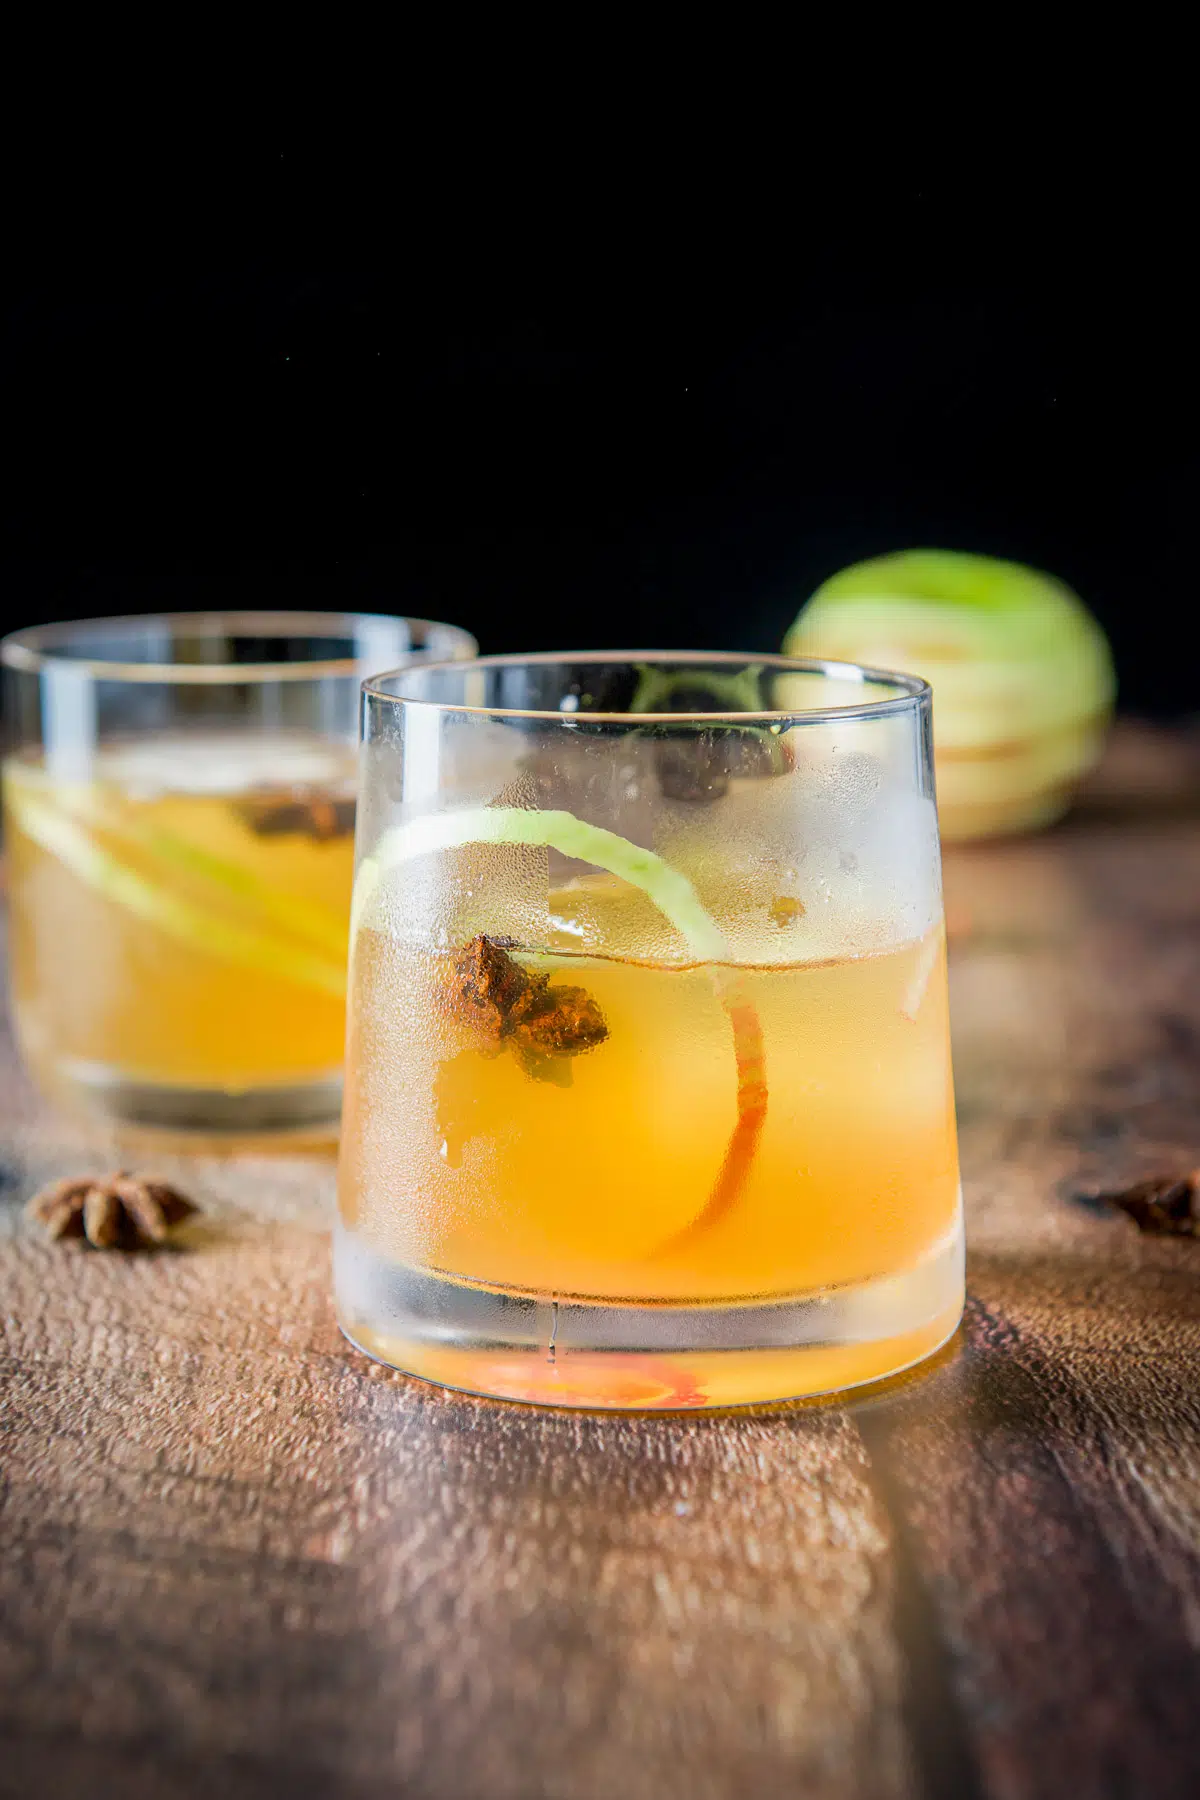 Vertical view of the apple cocktail in glasses with apple skin twist and star anise